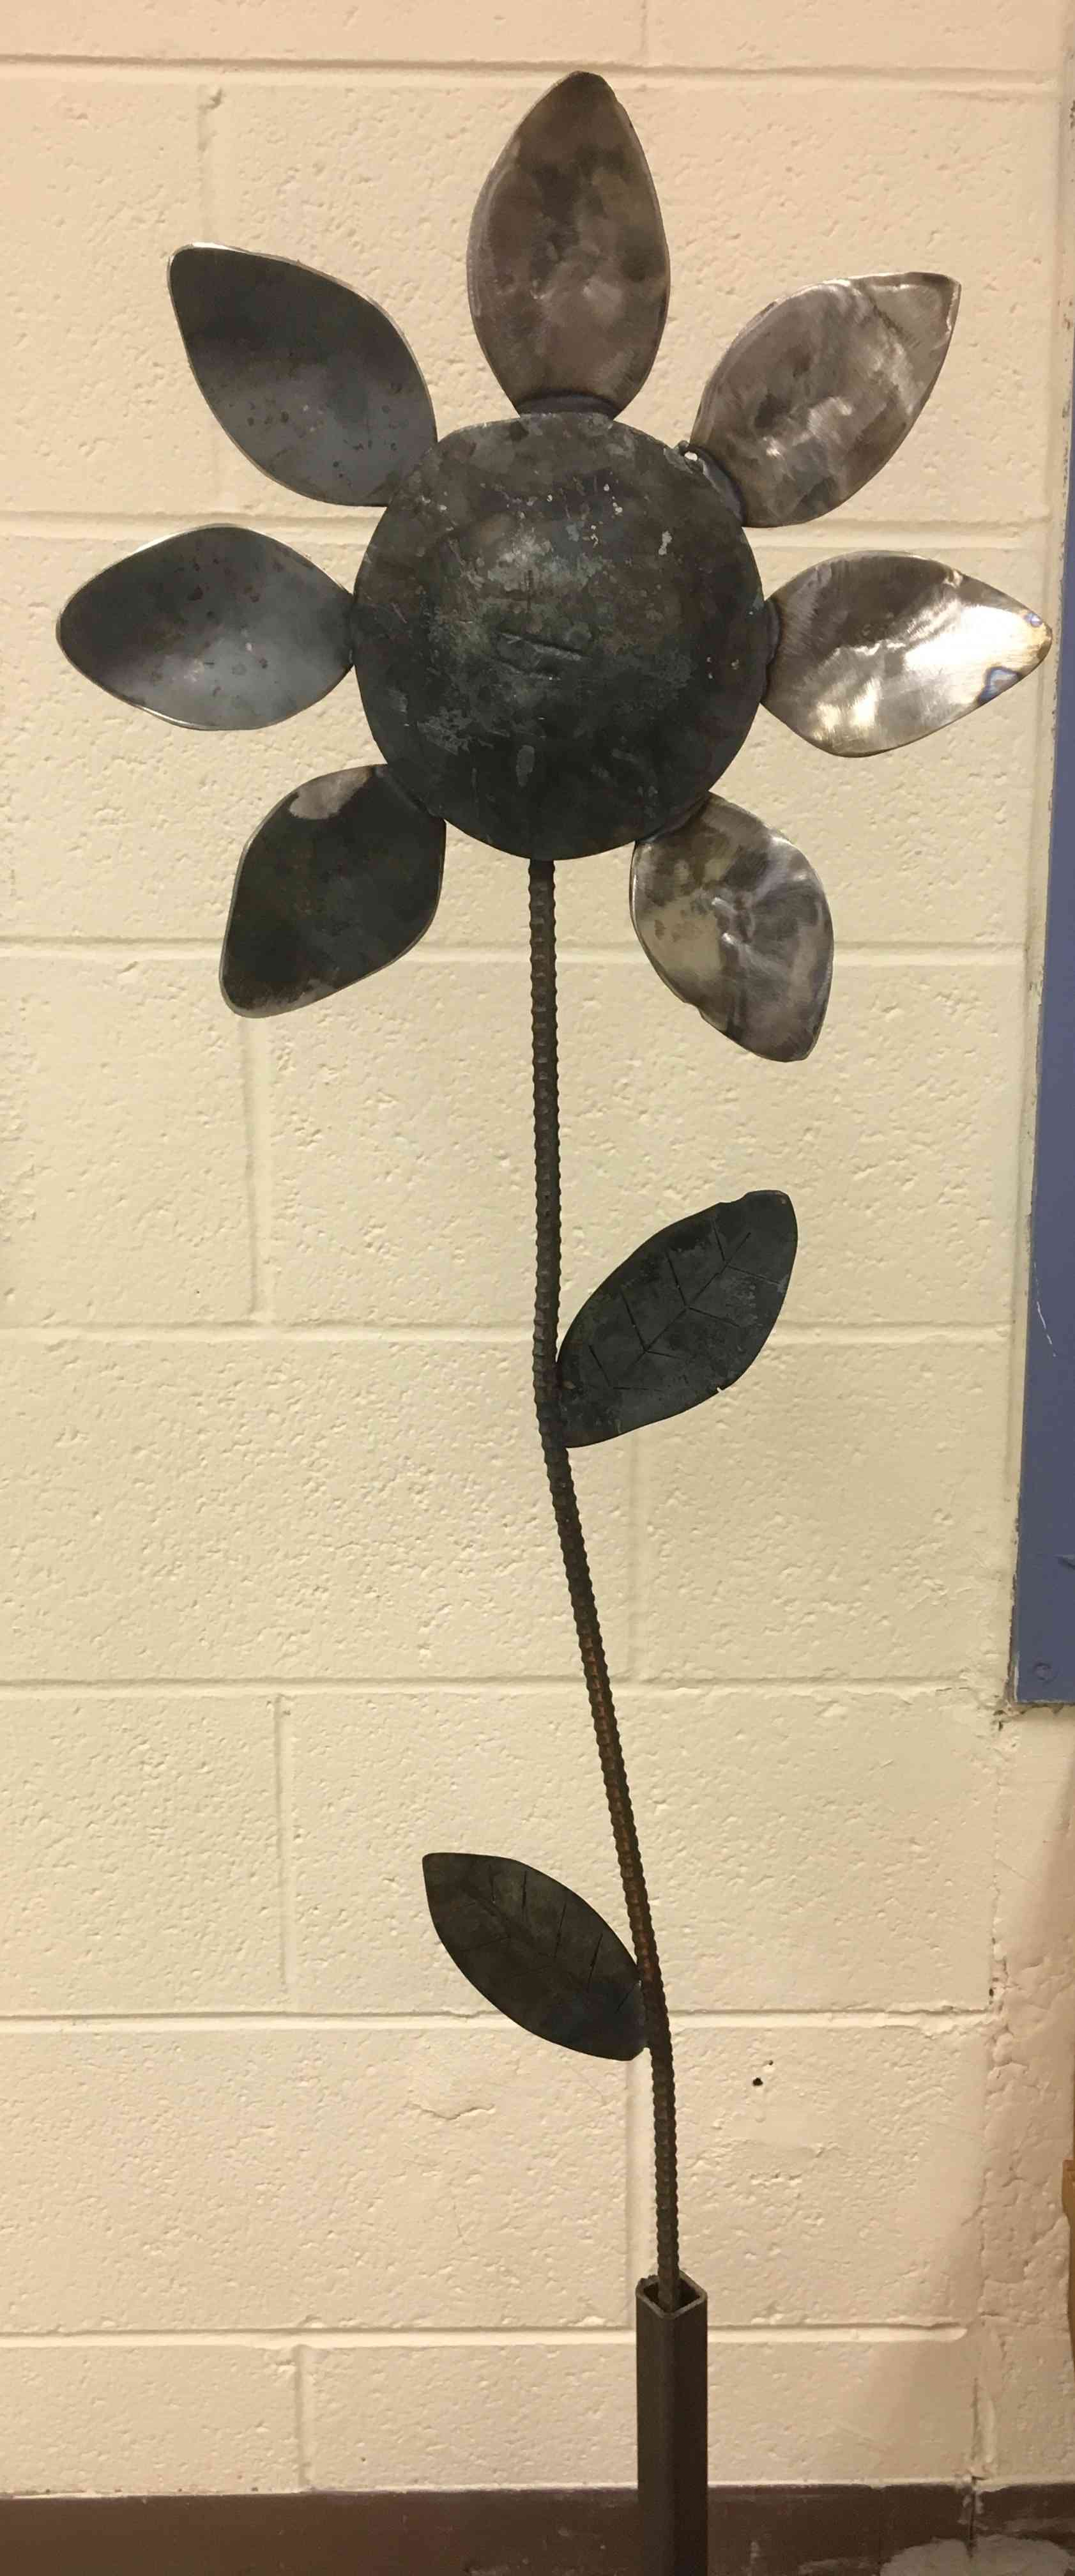 Student Hand-Made Sculpture/Welding products Image